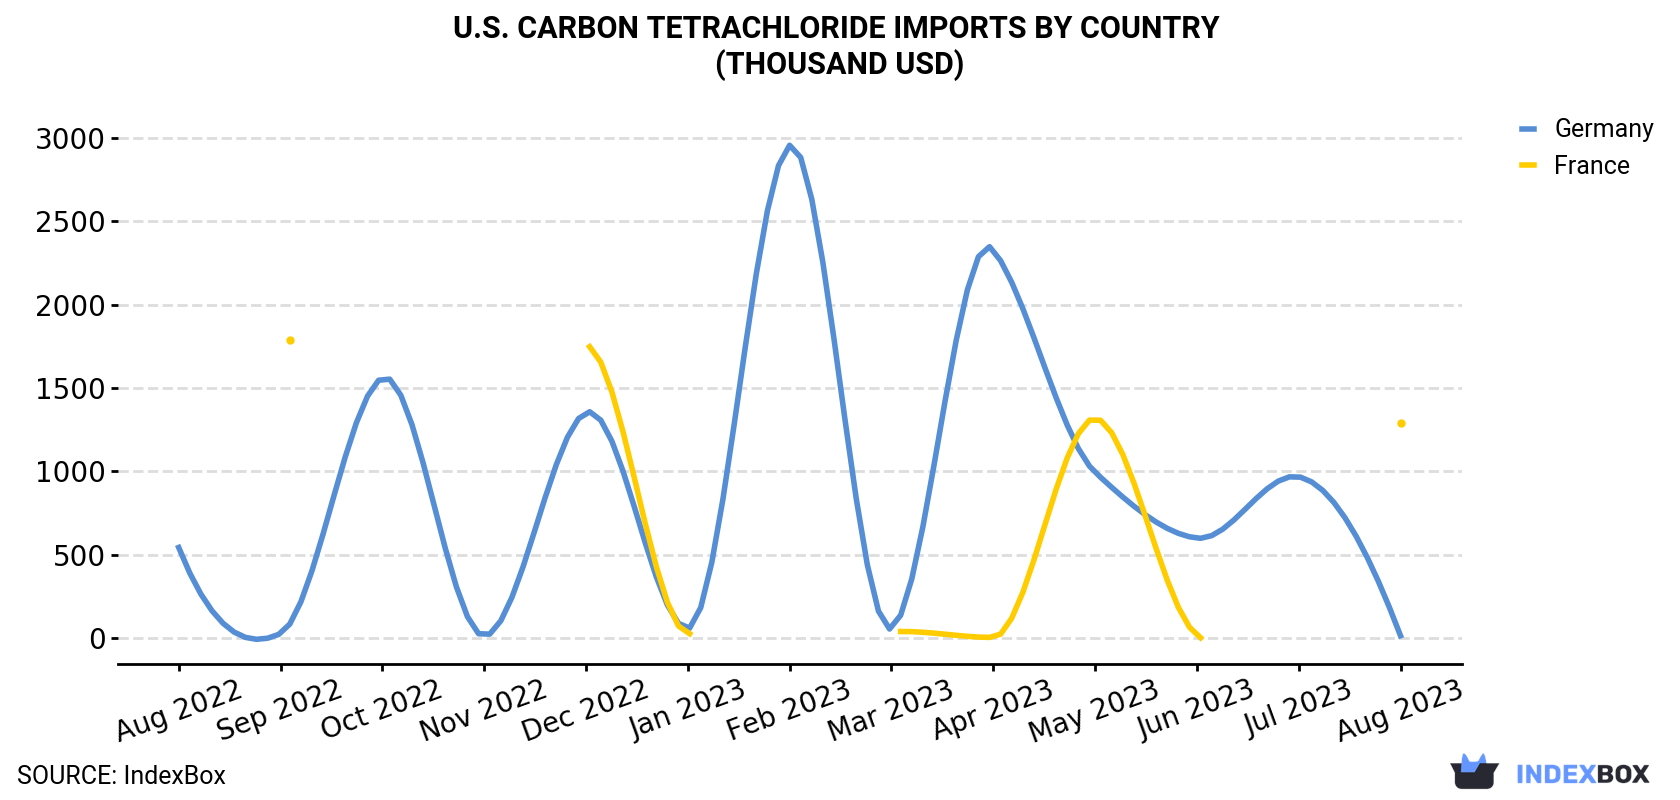 U.S. Carbon Tetrachloride Imports By Country (Thousand USD)